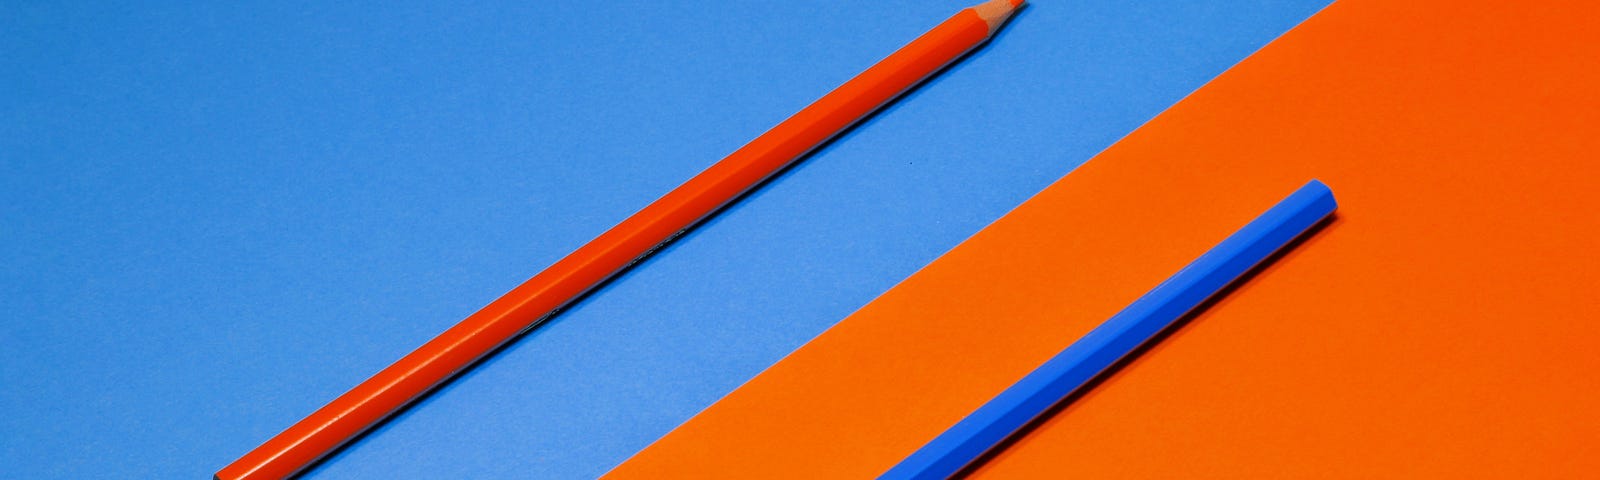 A red colored pencil on a blue background and a blue colored pencil on a red background.